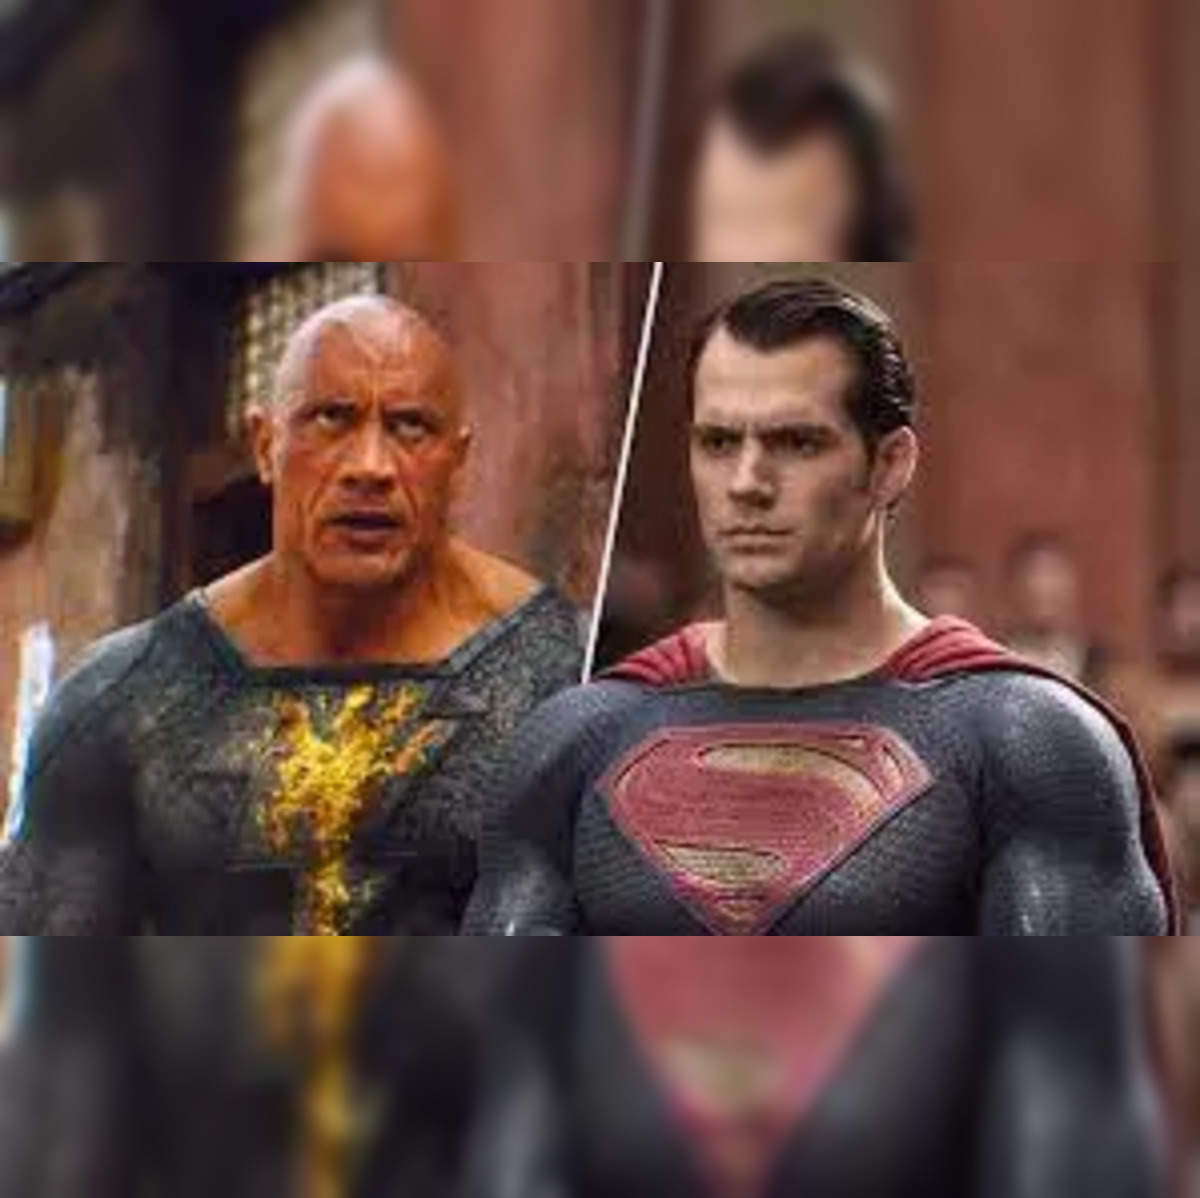 See Justice League Star Henry Cavill Don Classic Superman Suit